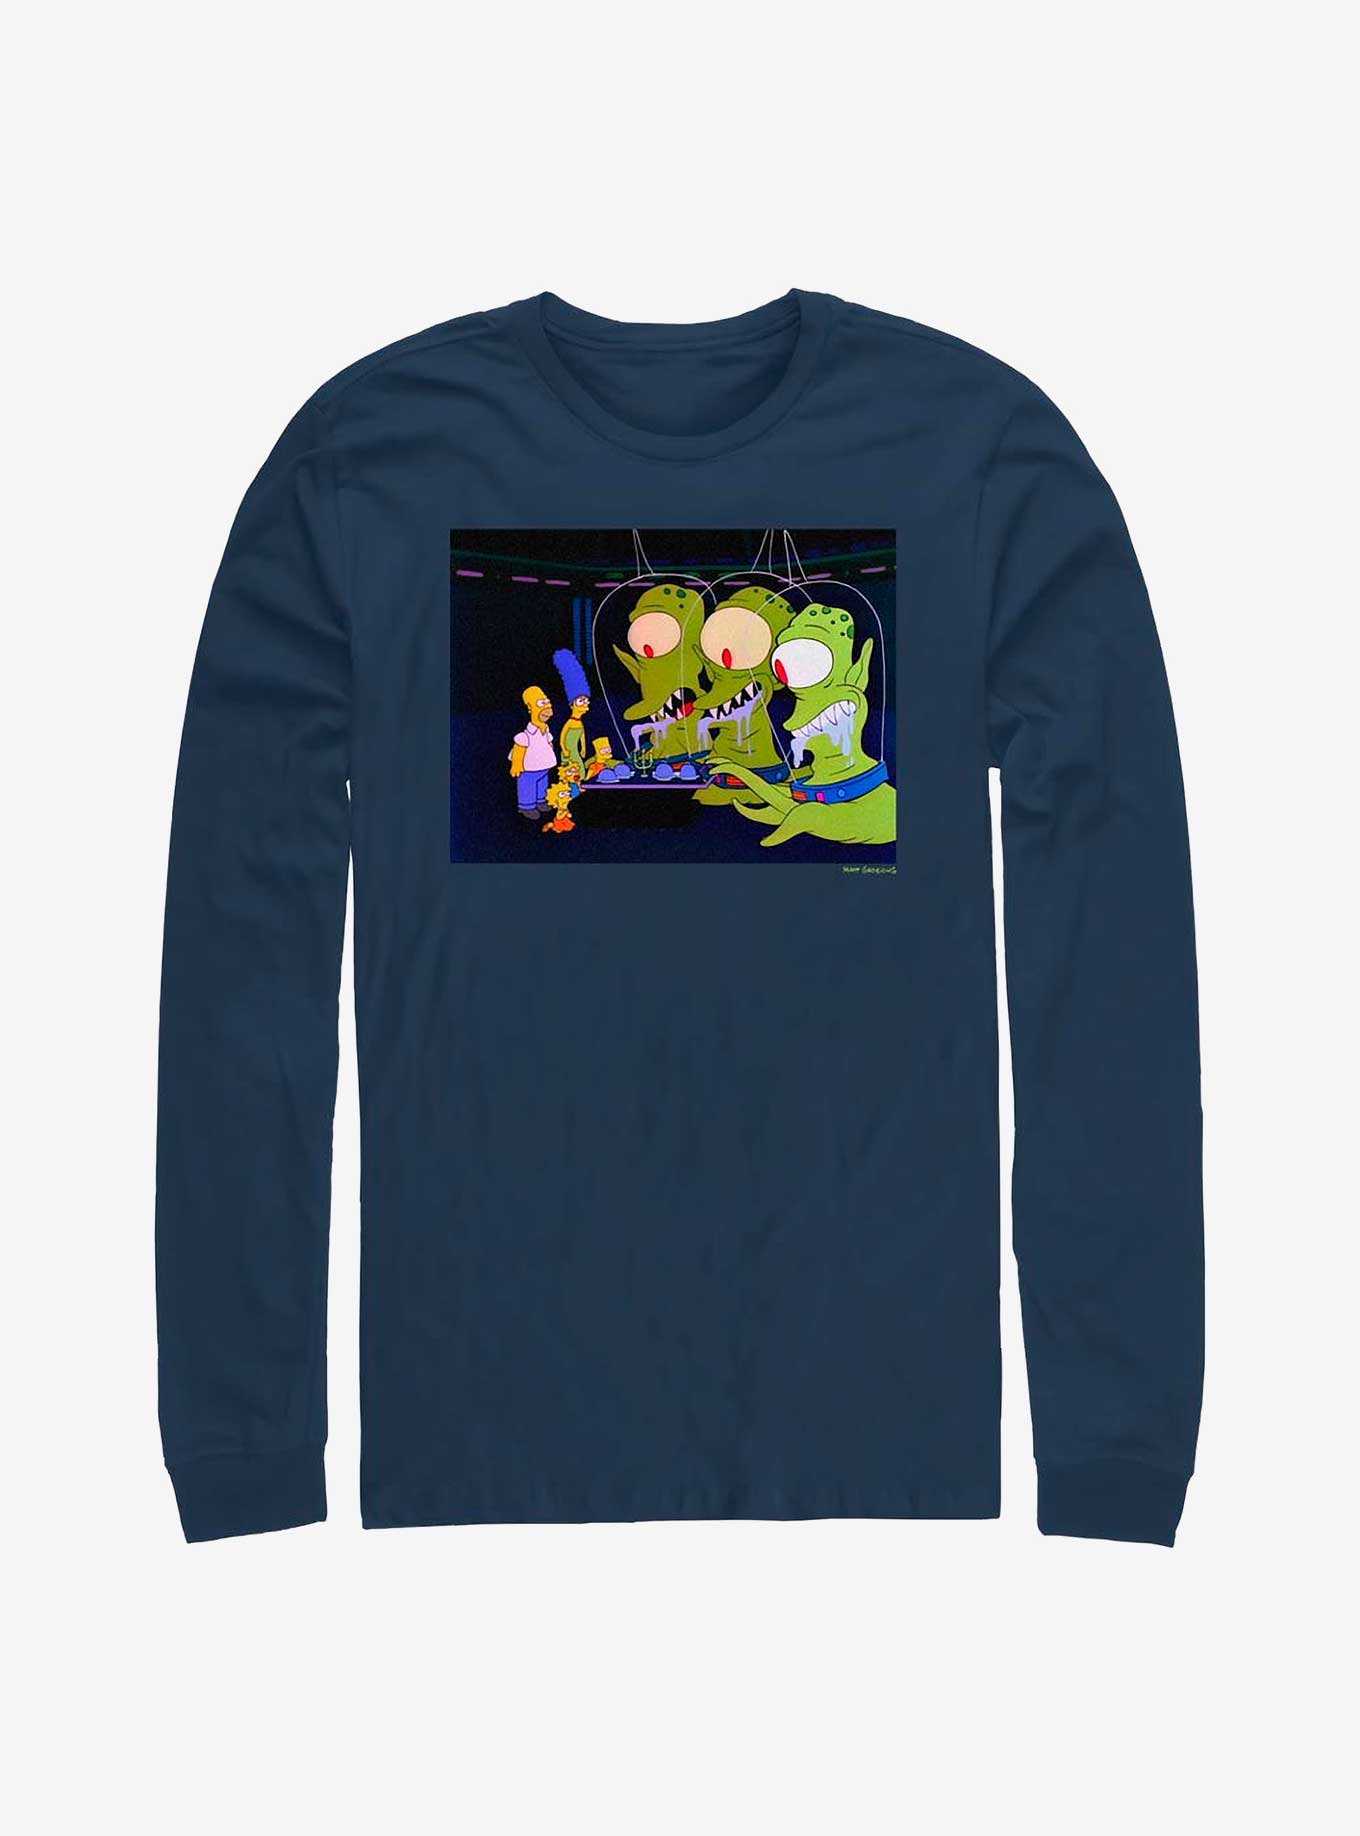 The Simpsons Treehouse Of Horrow Episode One Aliens Long-Sleeve T-Shirt, , hi-res